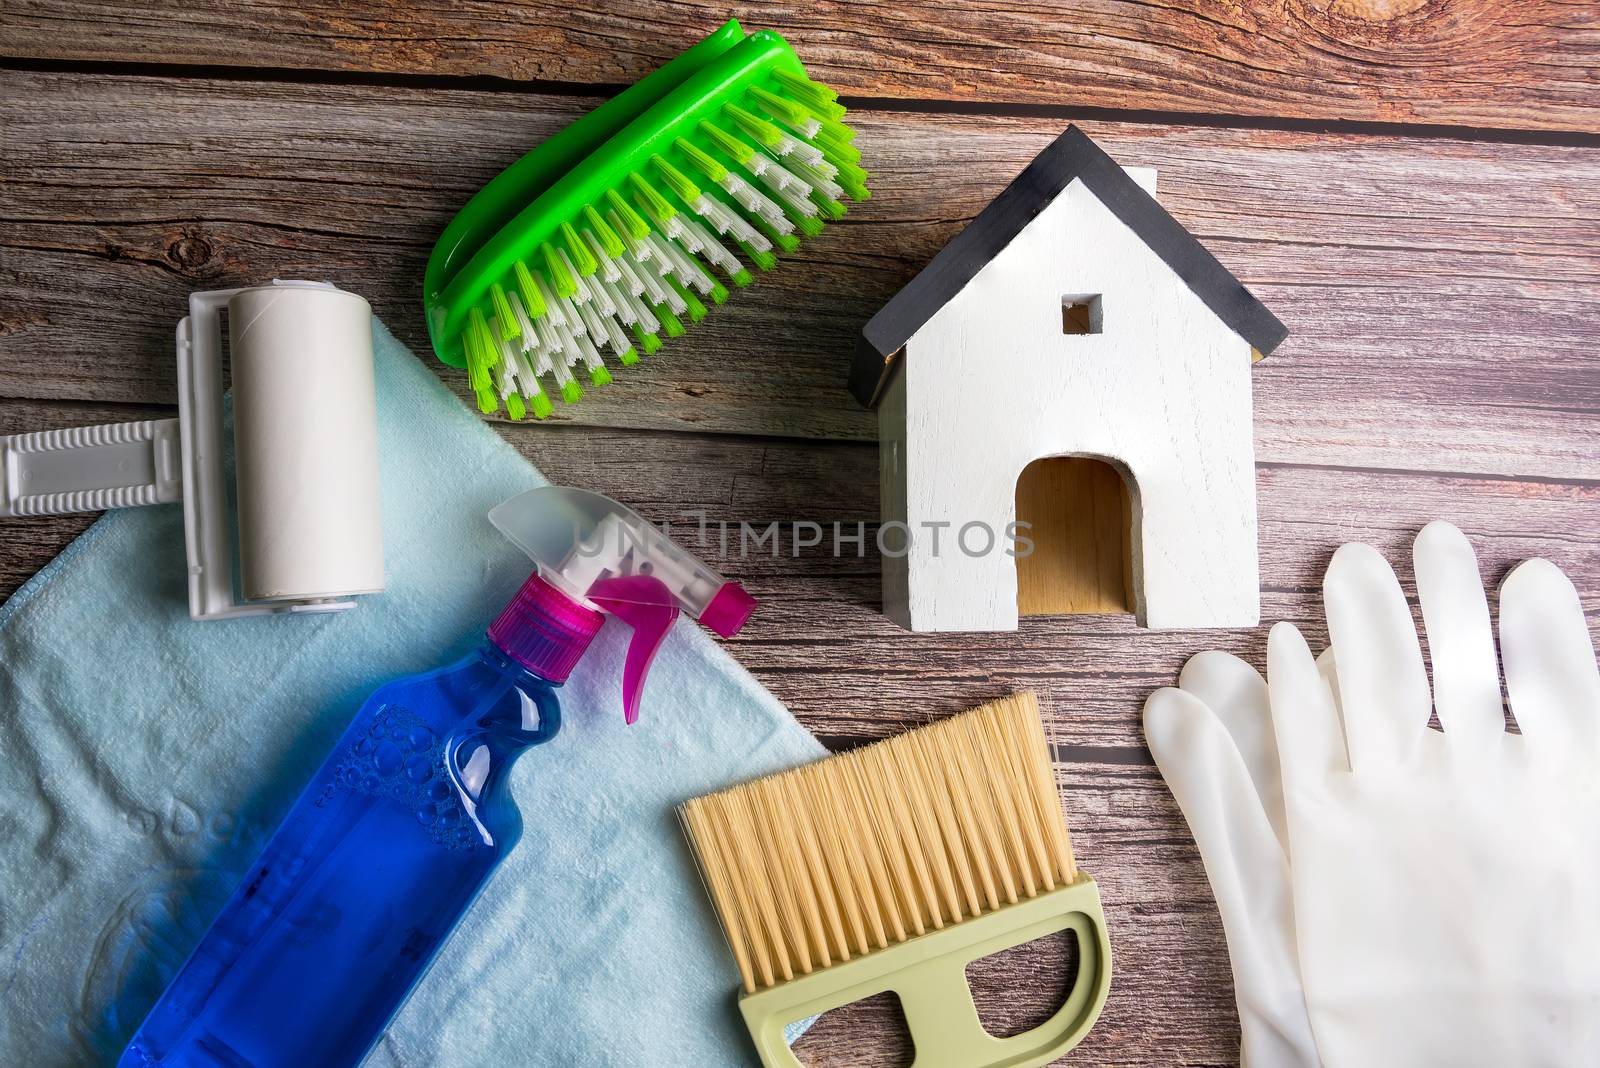 Wooden model white houses and house cleaning equipment on a teble wooden  background. Concept Clean house Keep house clean.